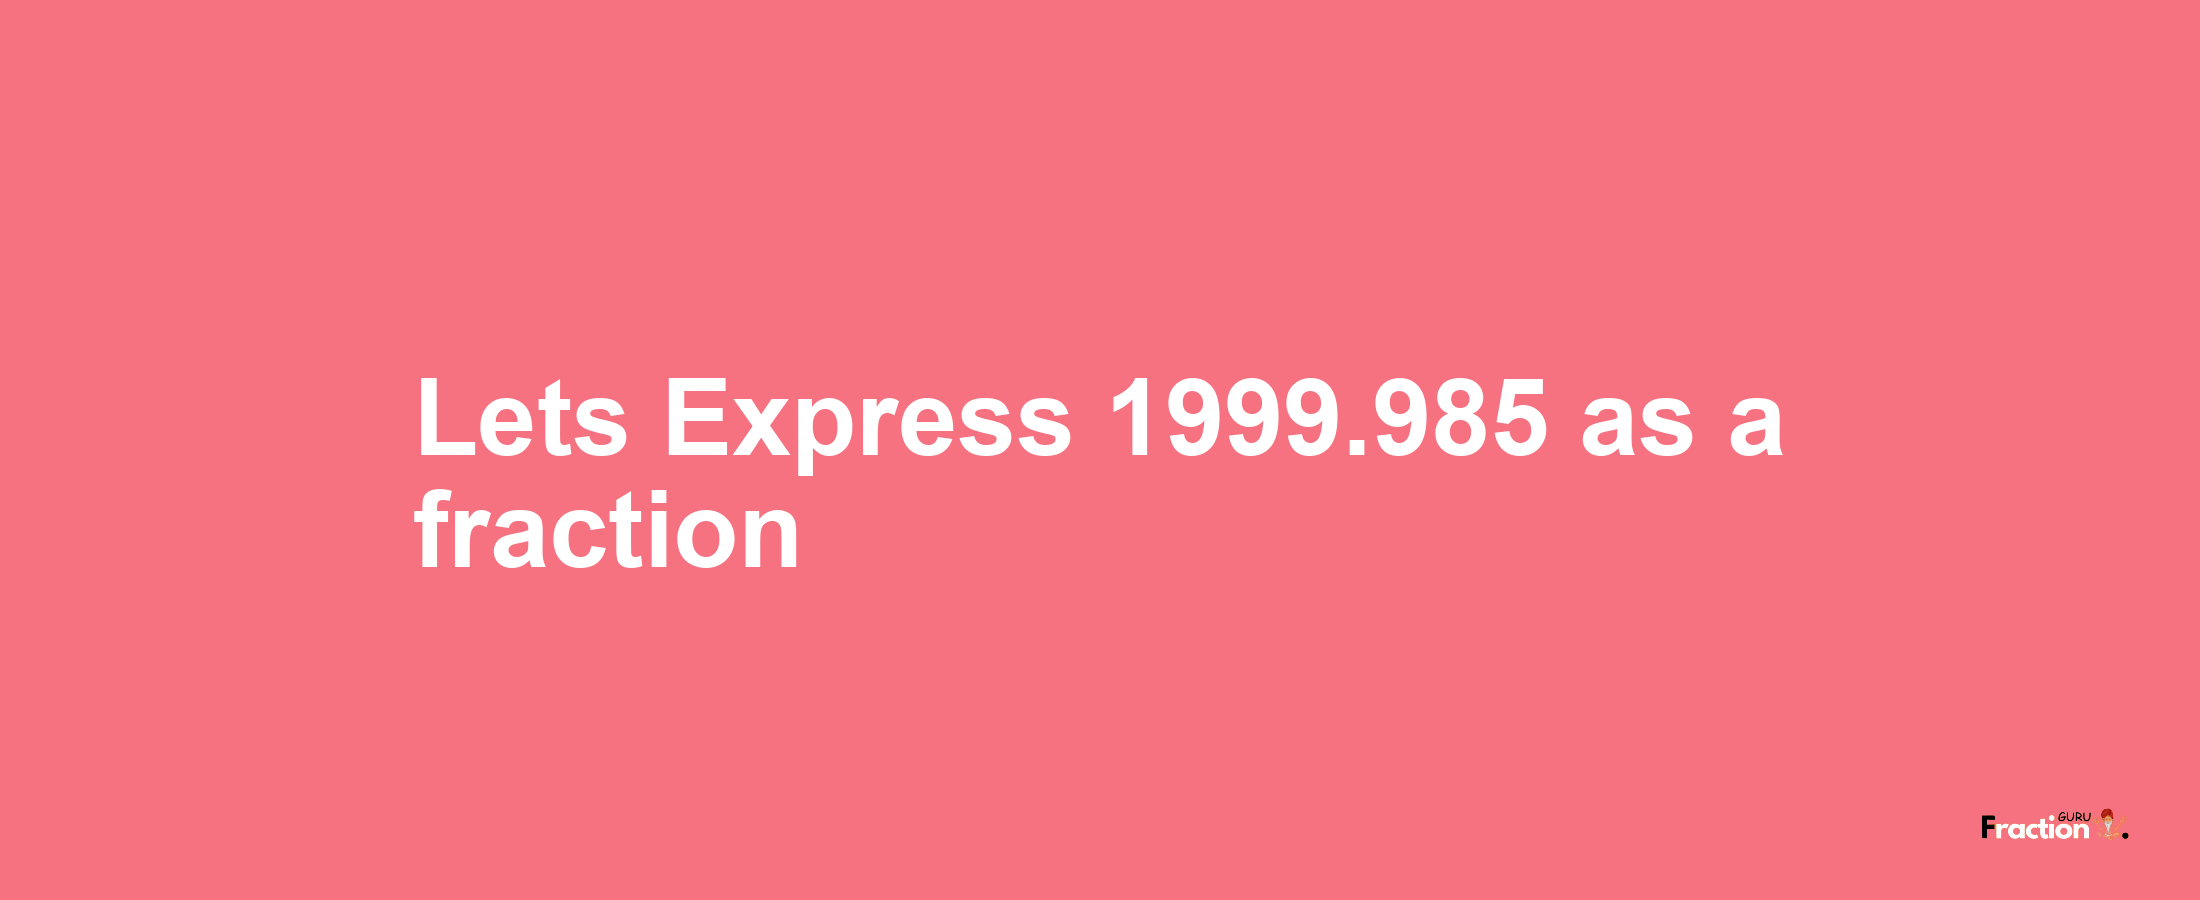 Lets Express 1999.985 as afraction